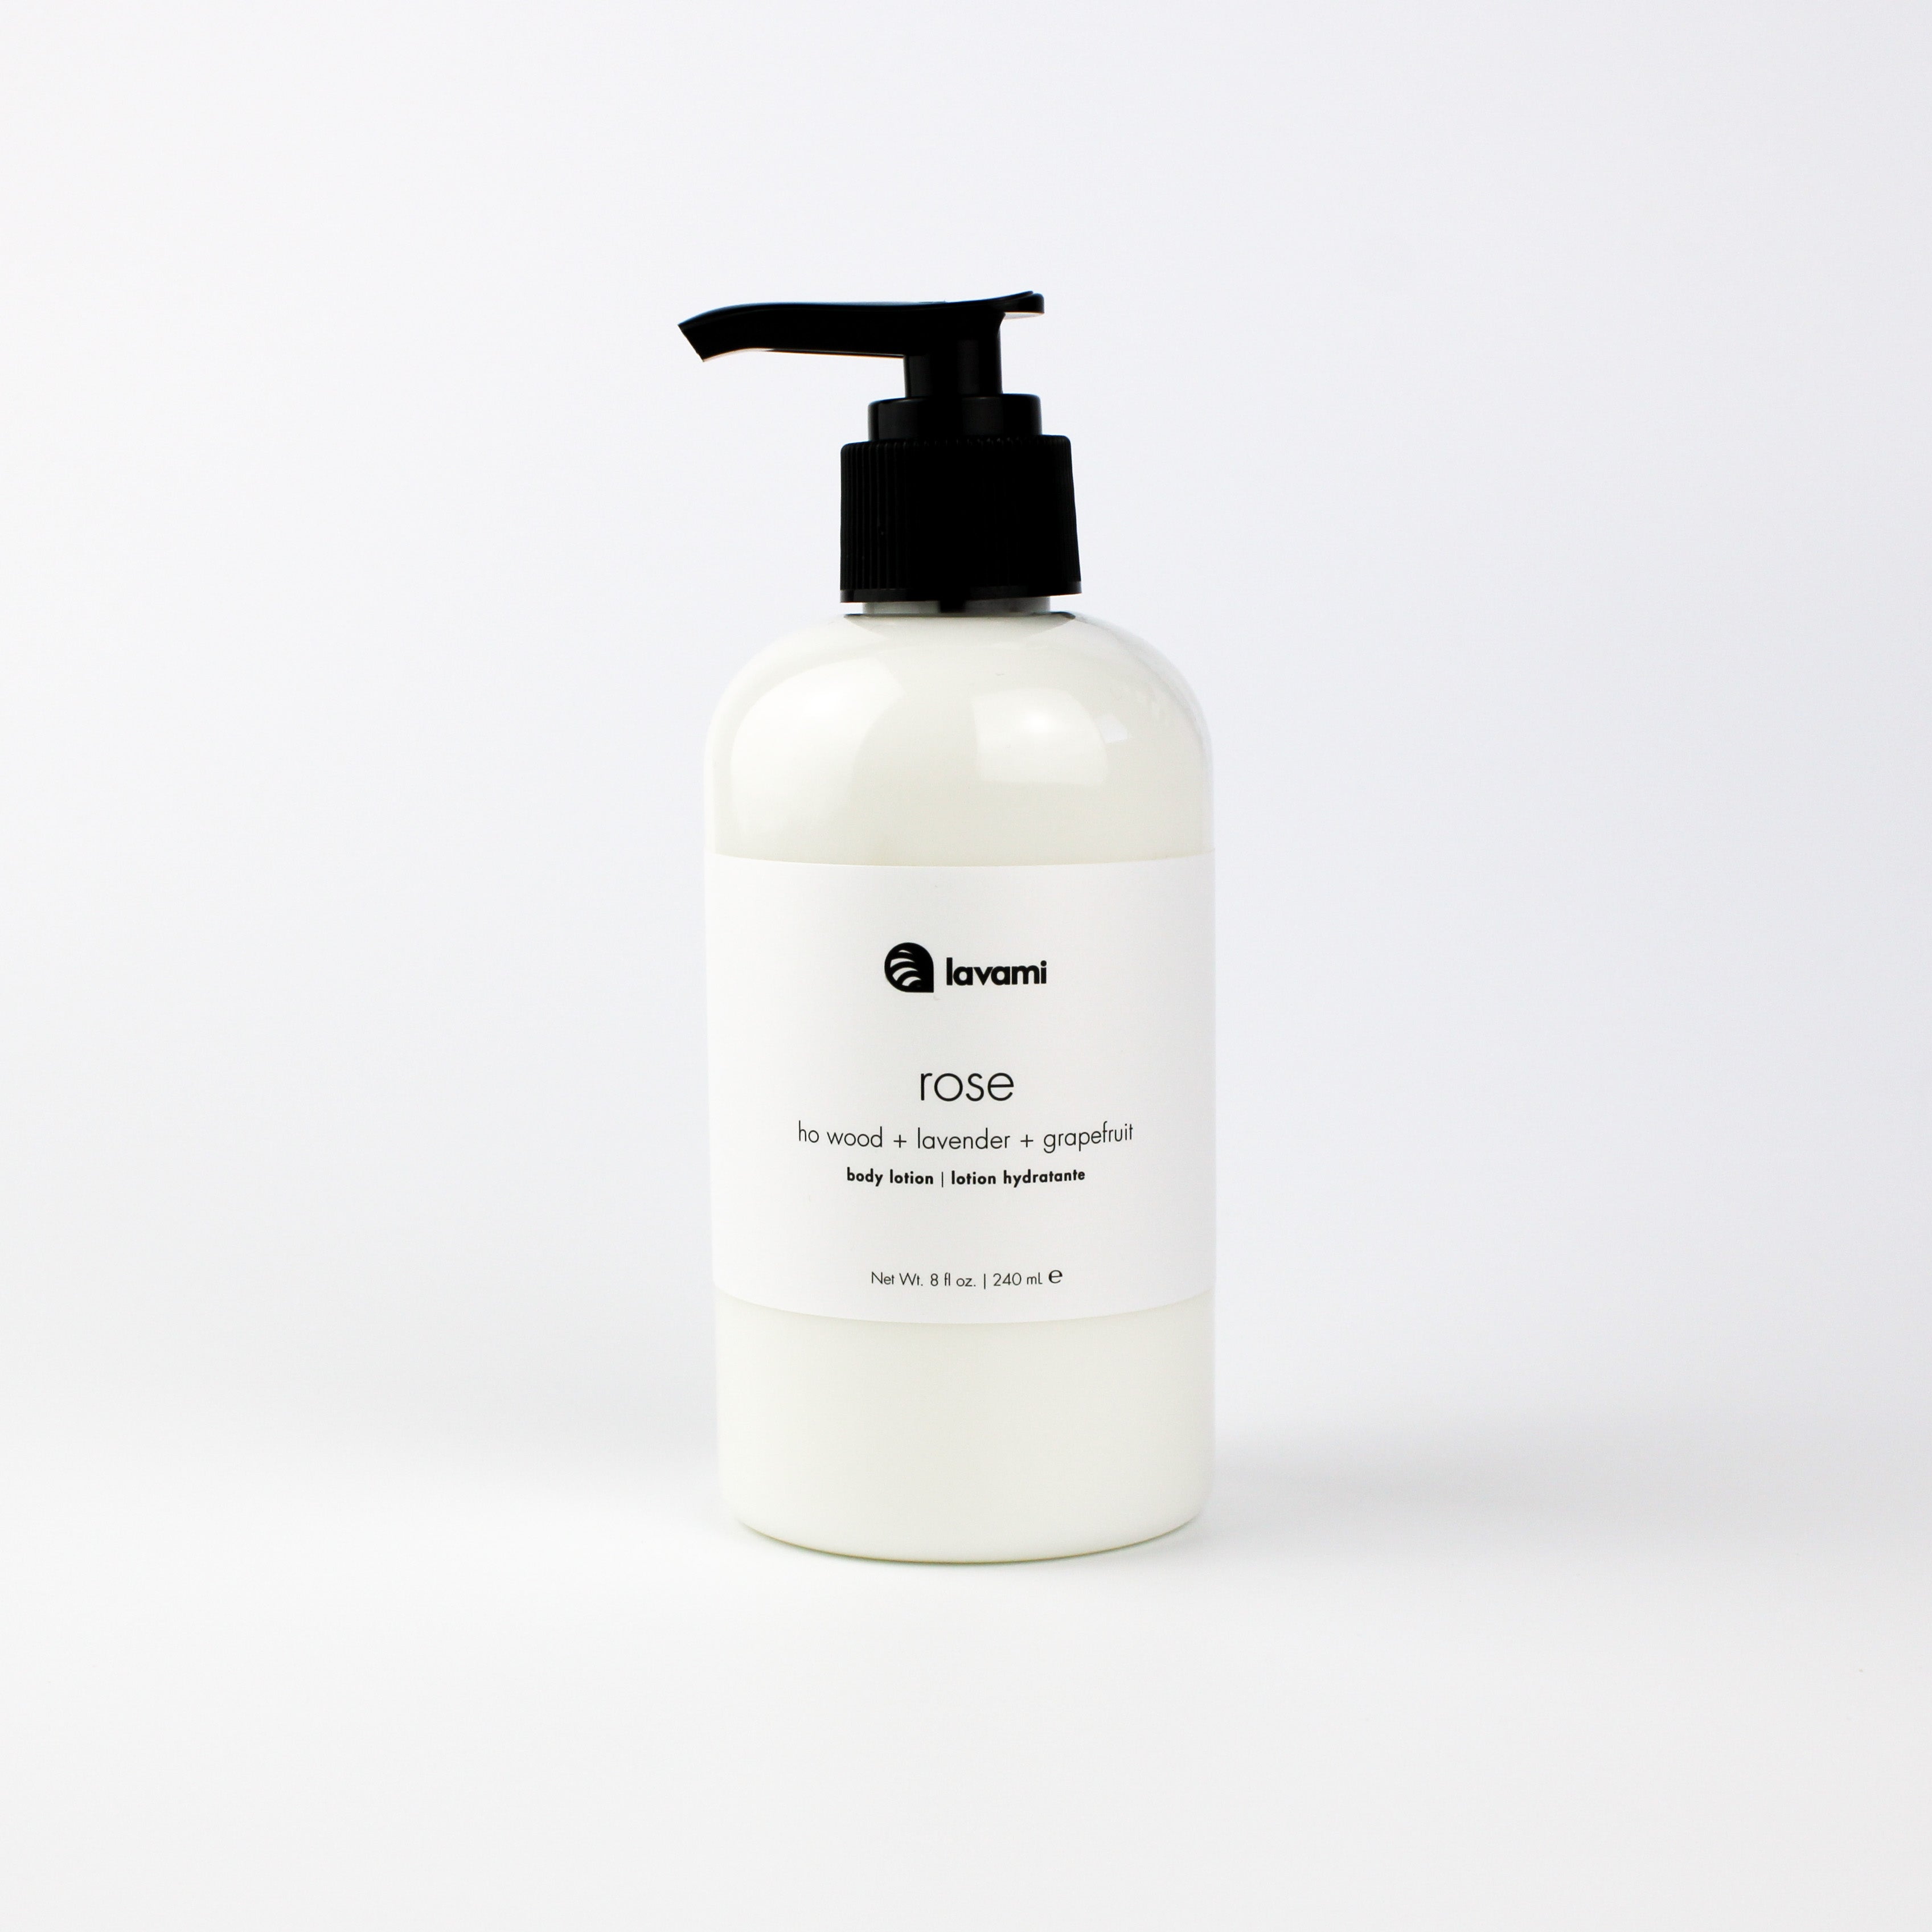 Gentle and hydrating ho wood, grapefruit, and lavender lotion with a probiotic preservative.